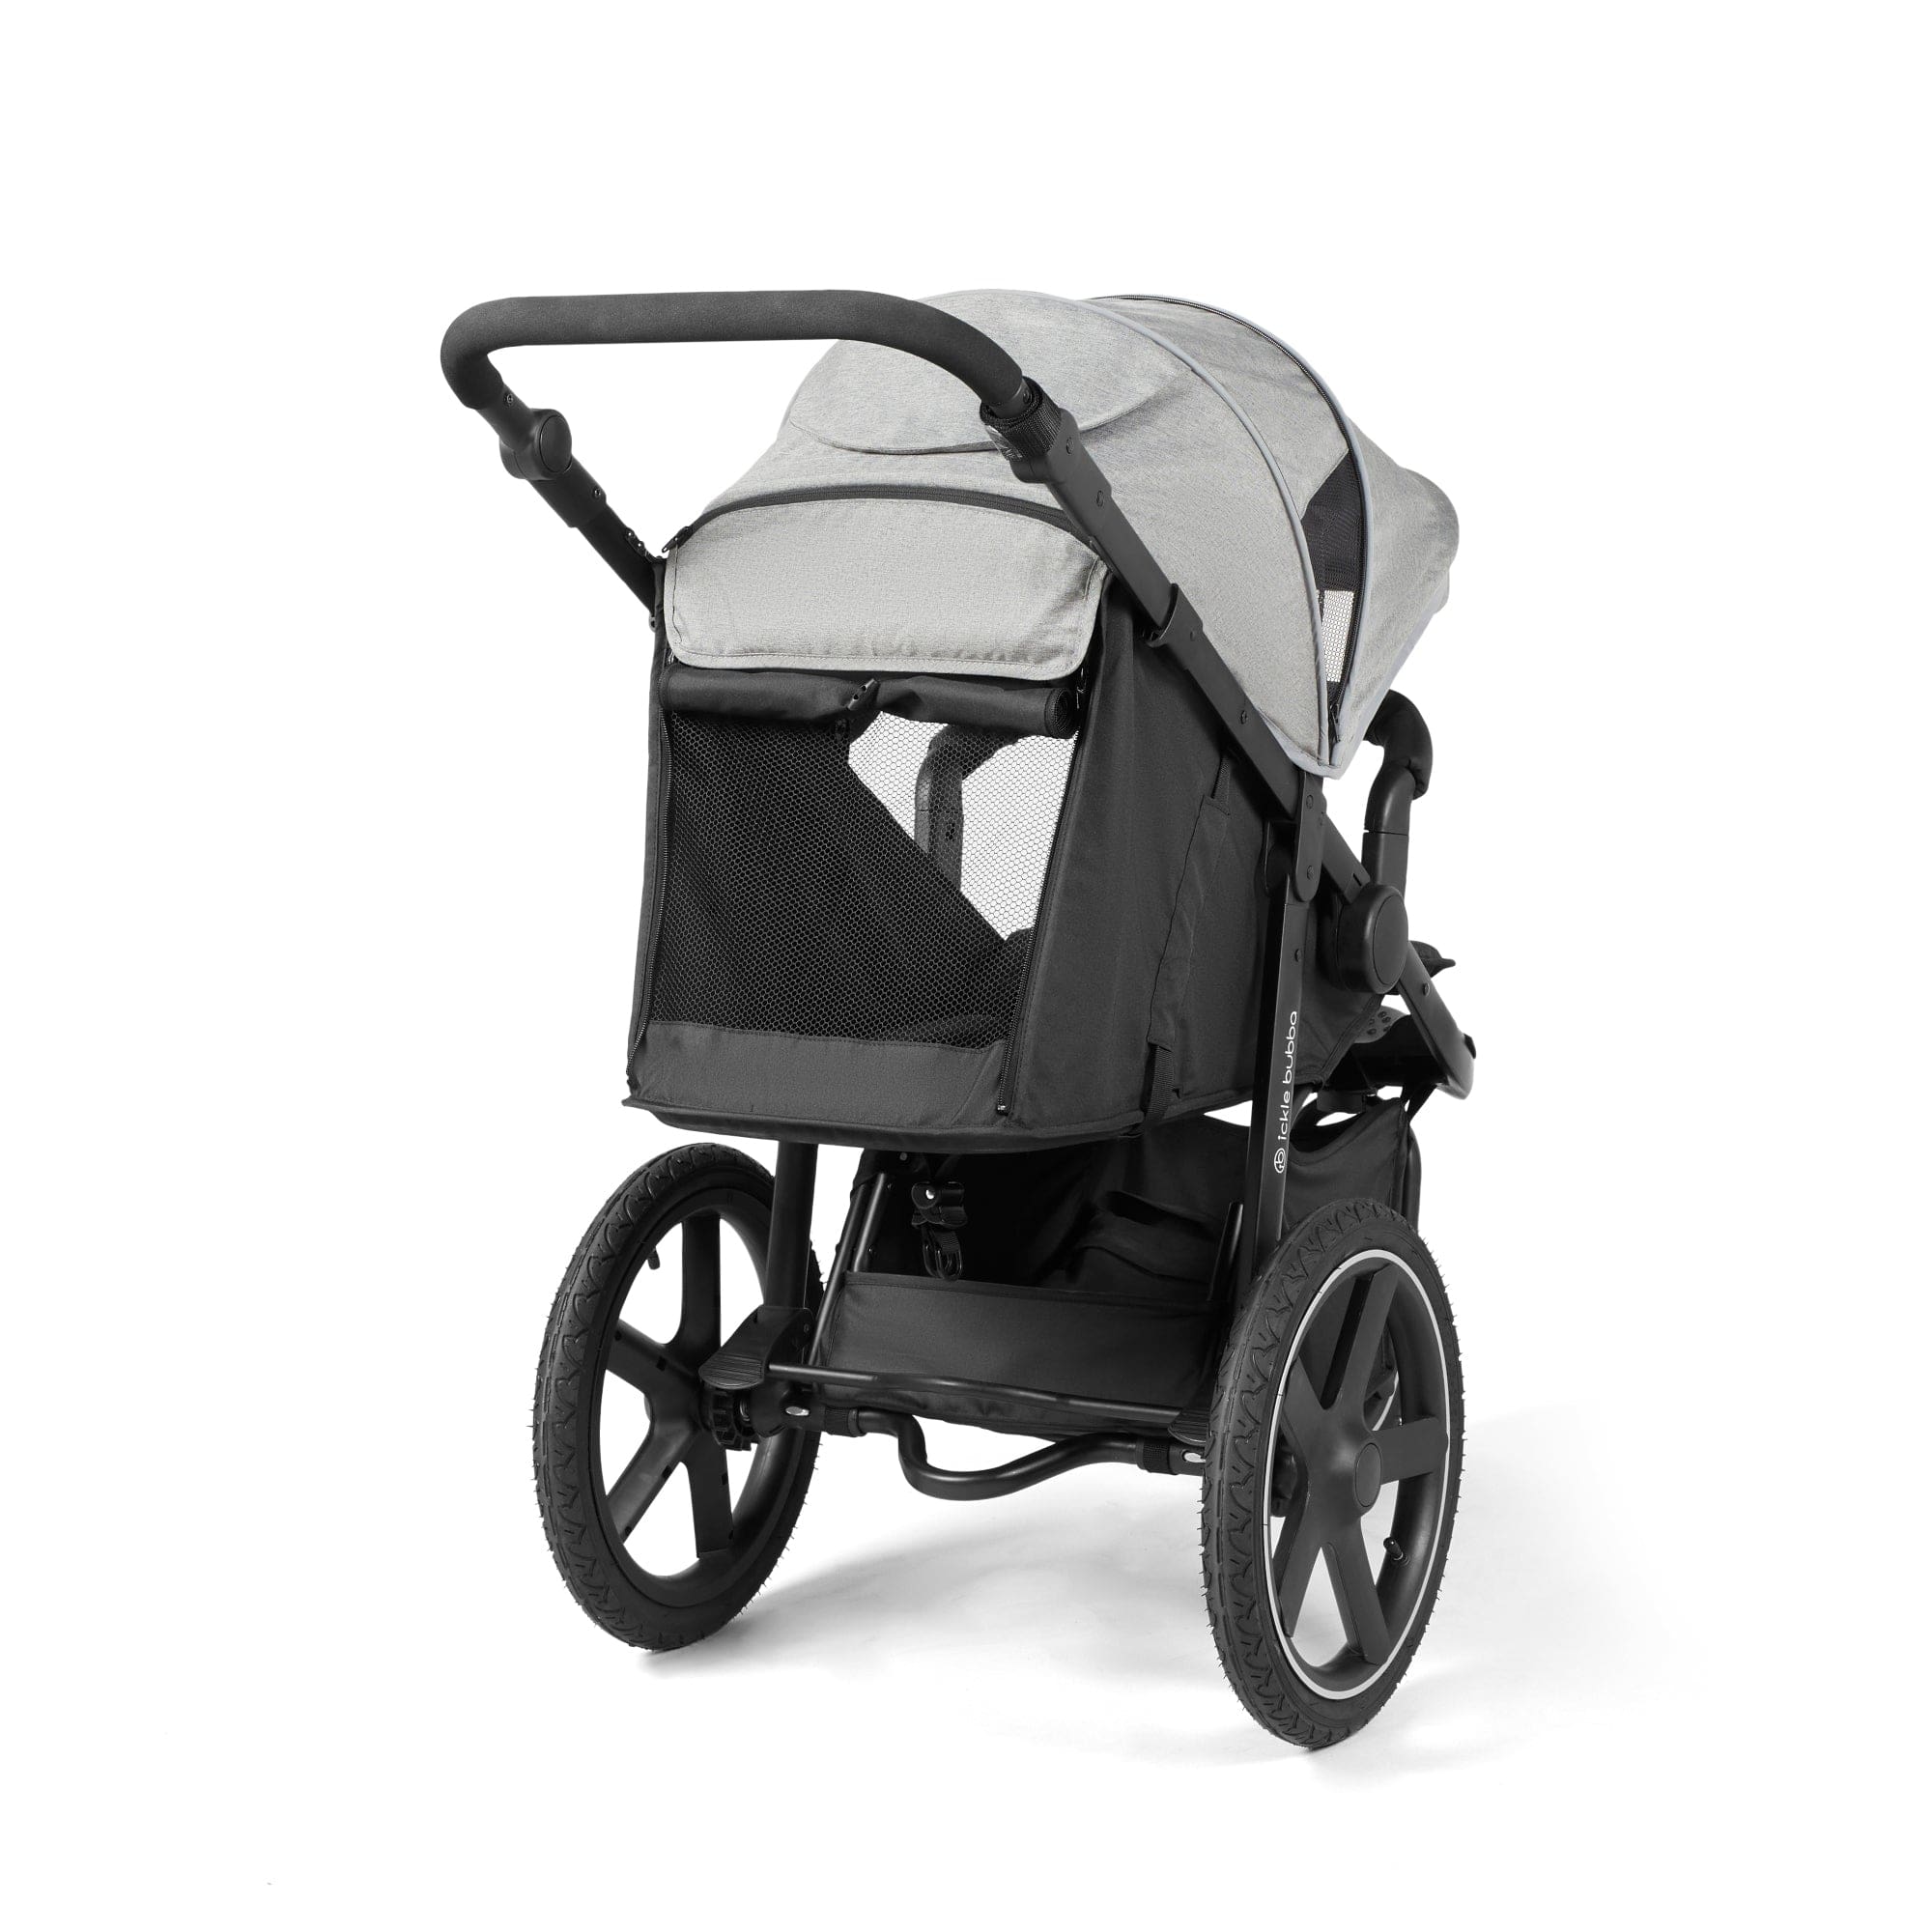 Ickle Bubba Venus Prime Jogger Stroller I-Size Travel System in Black/Space Grey with Base 3 Wheelers